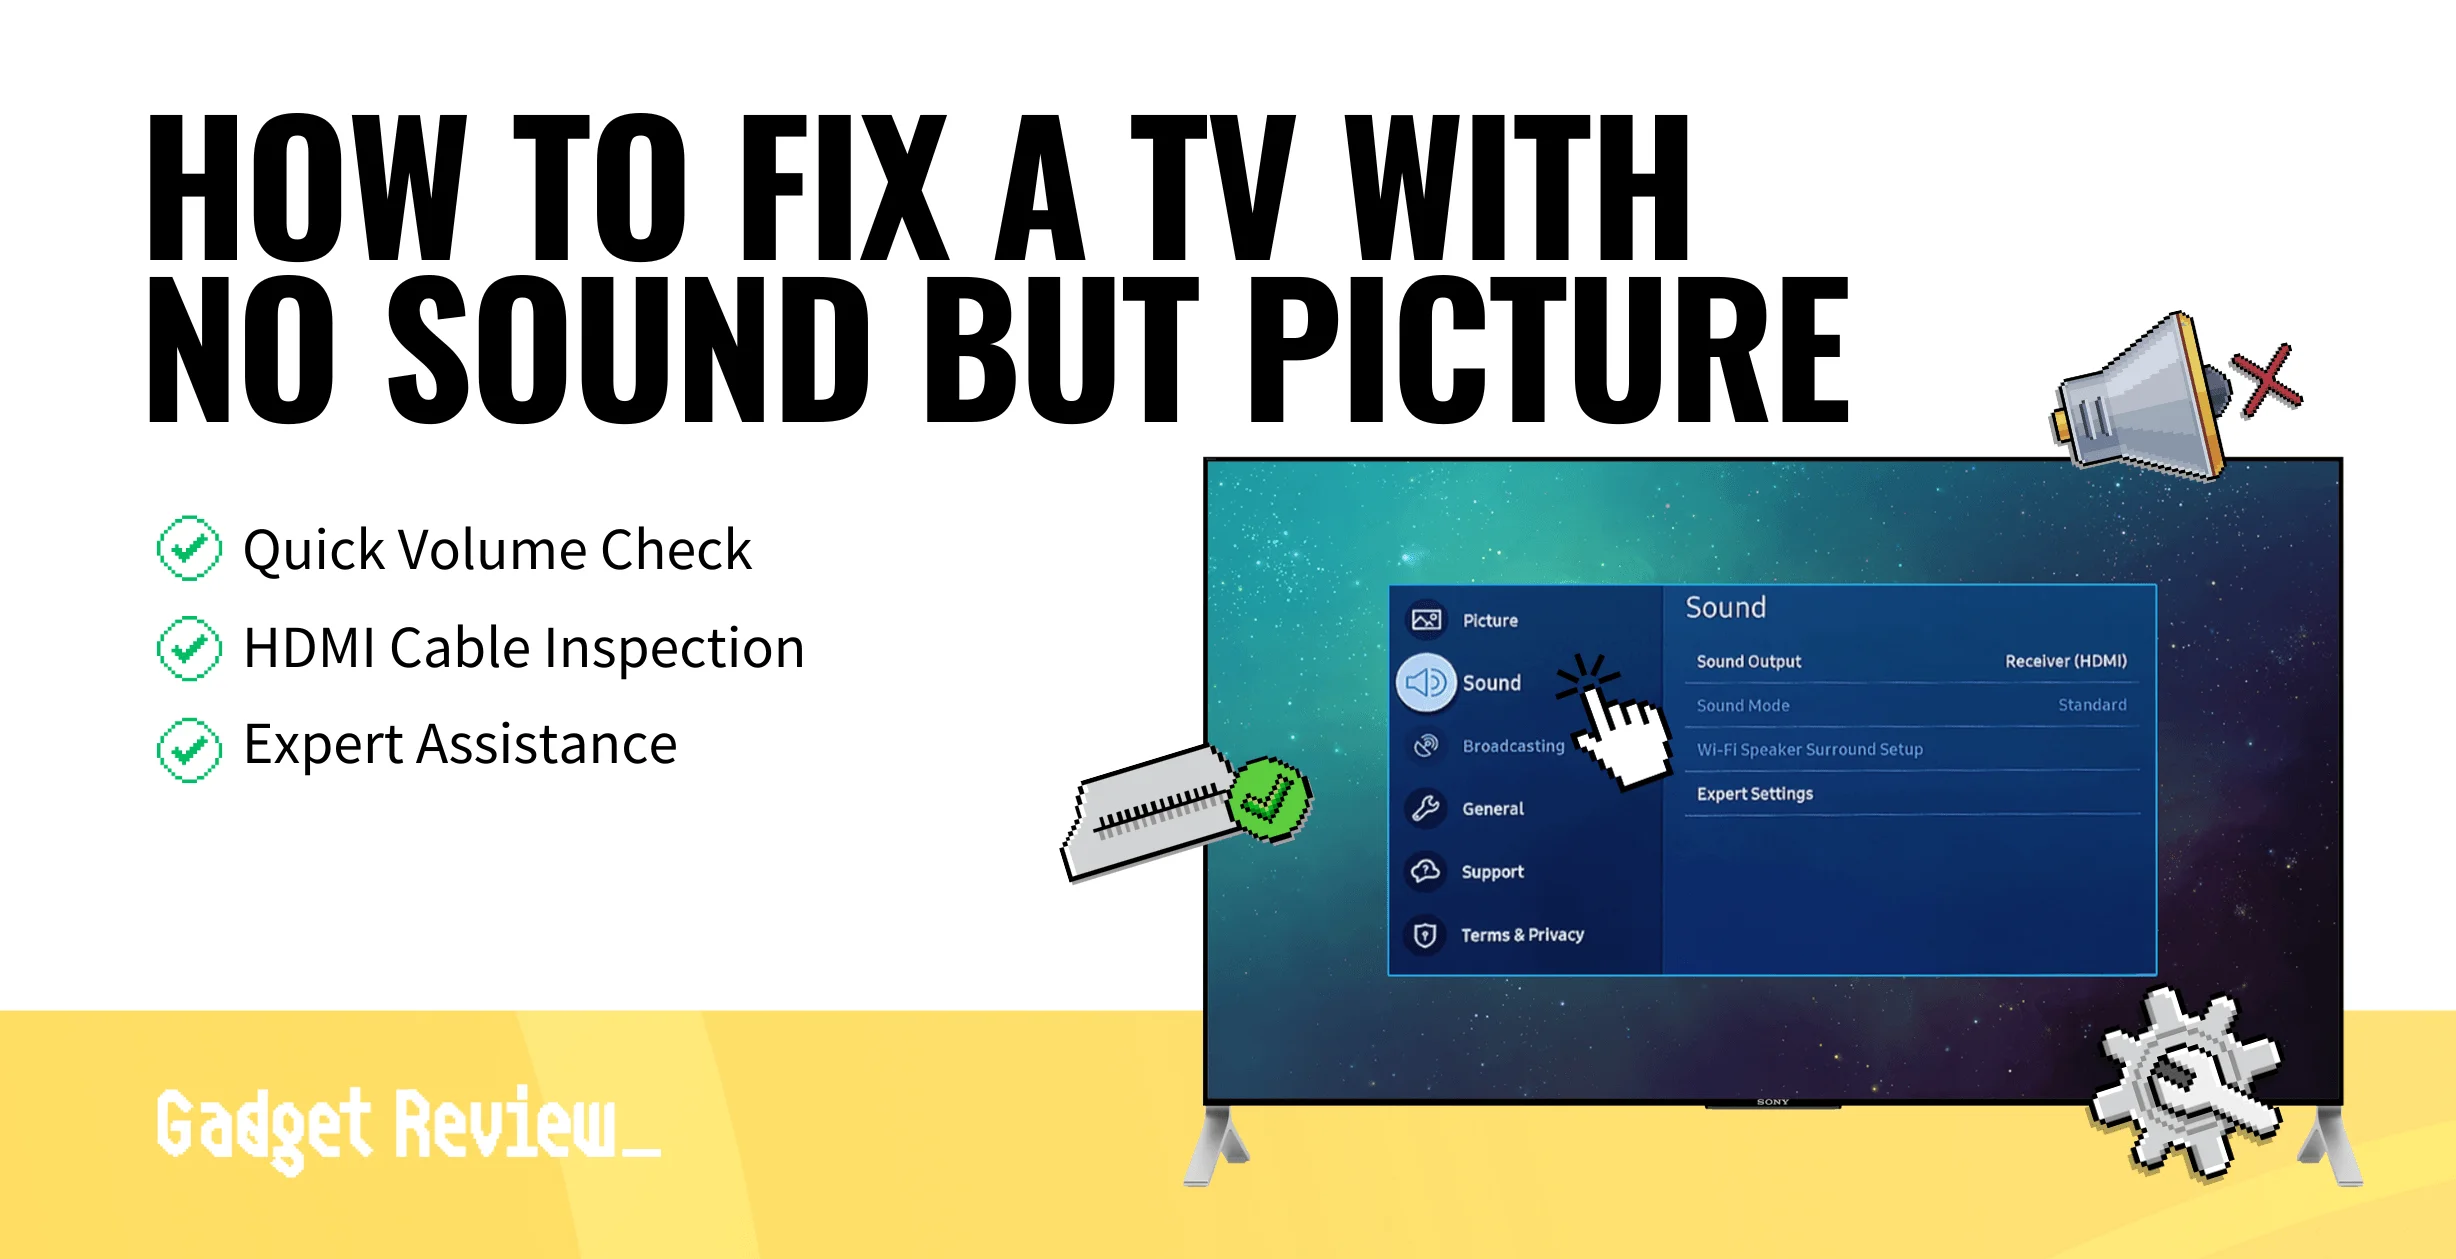 How To Fix a TV with No Sound But Picture